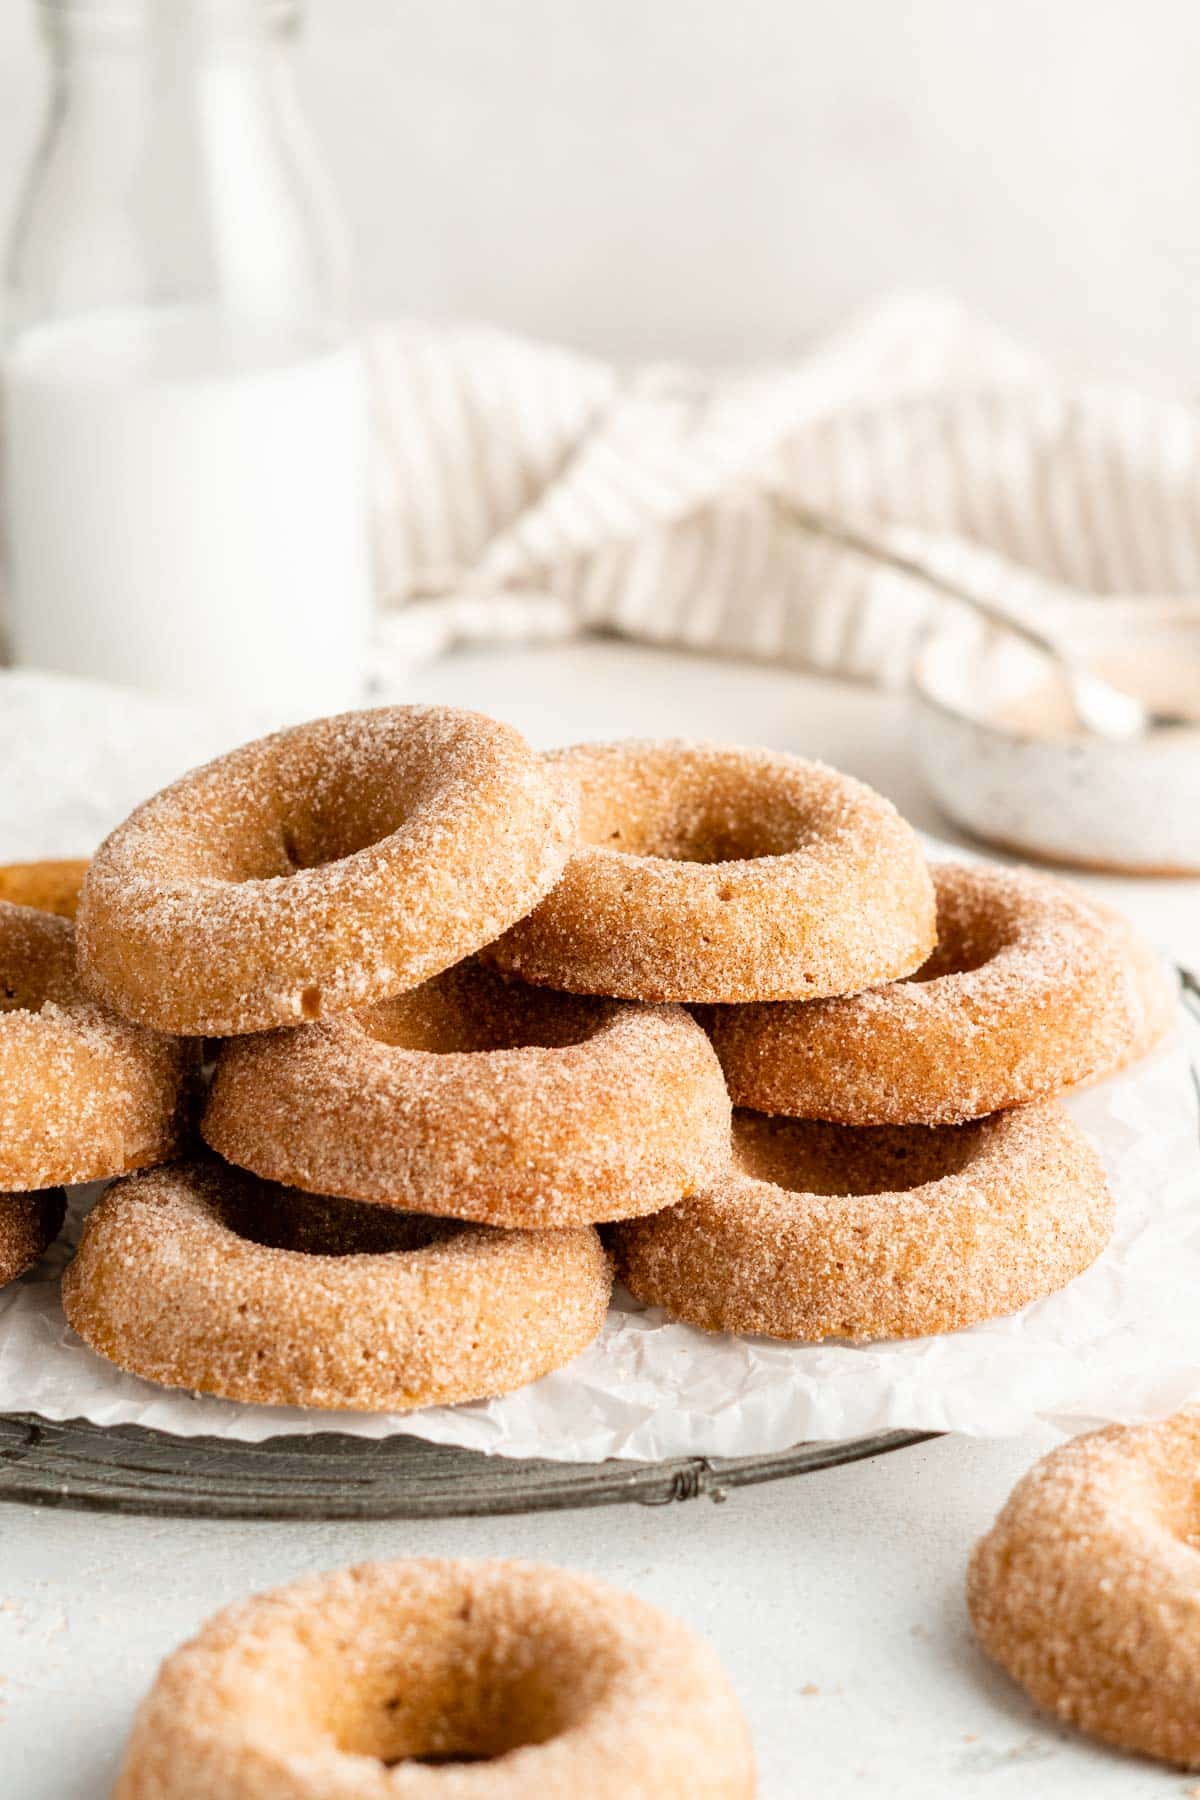 Cinnamon sugar donuts stacked on parchment paper.